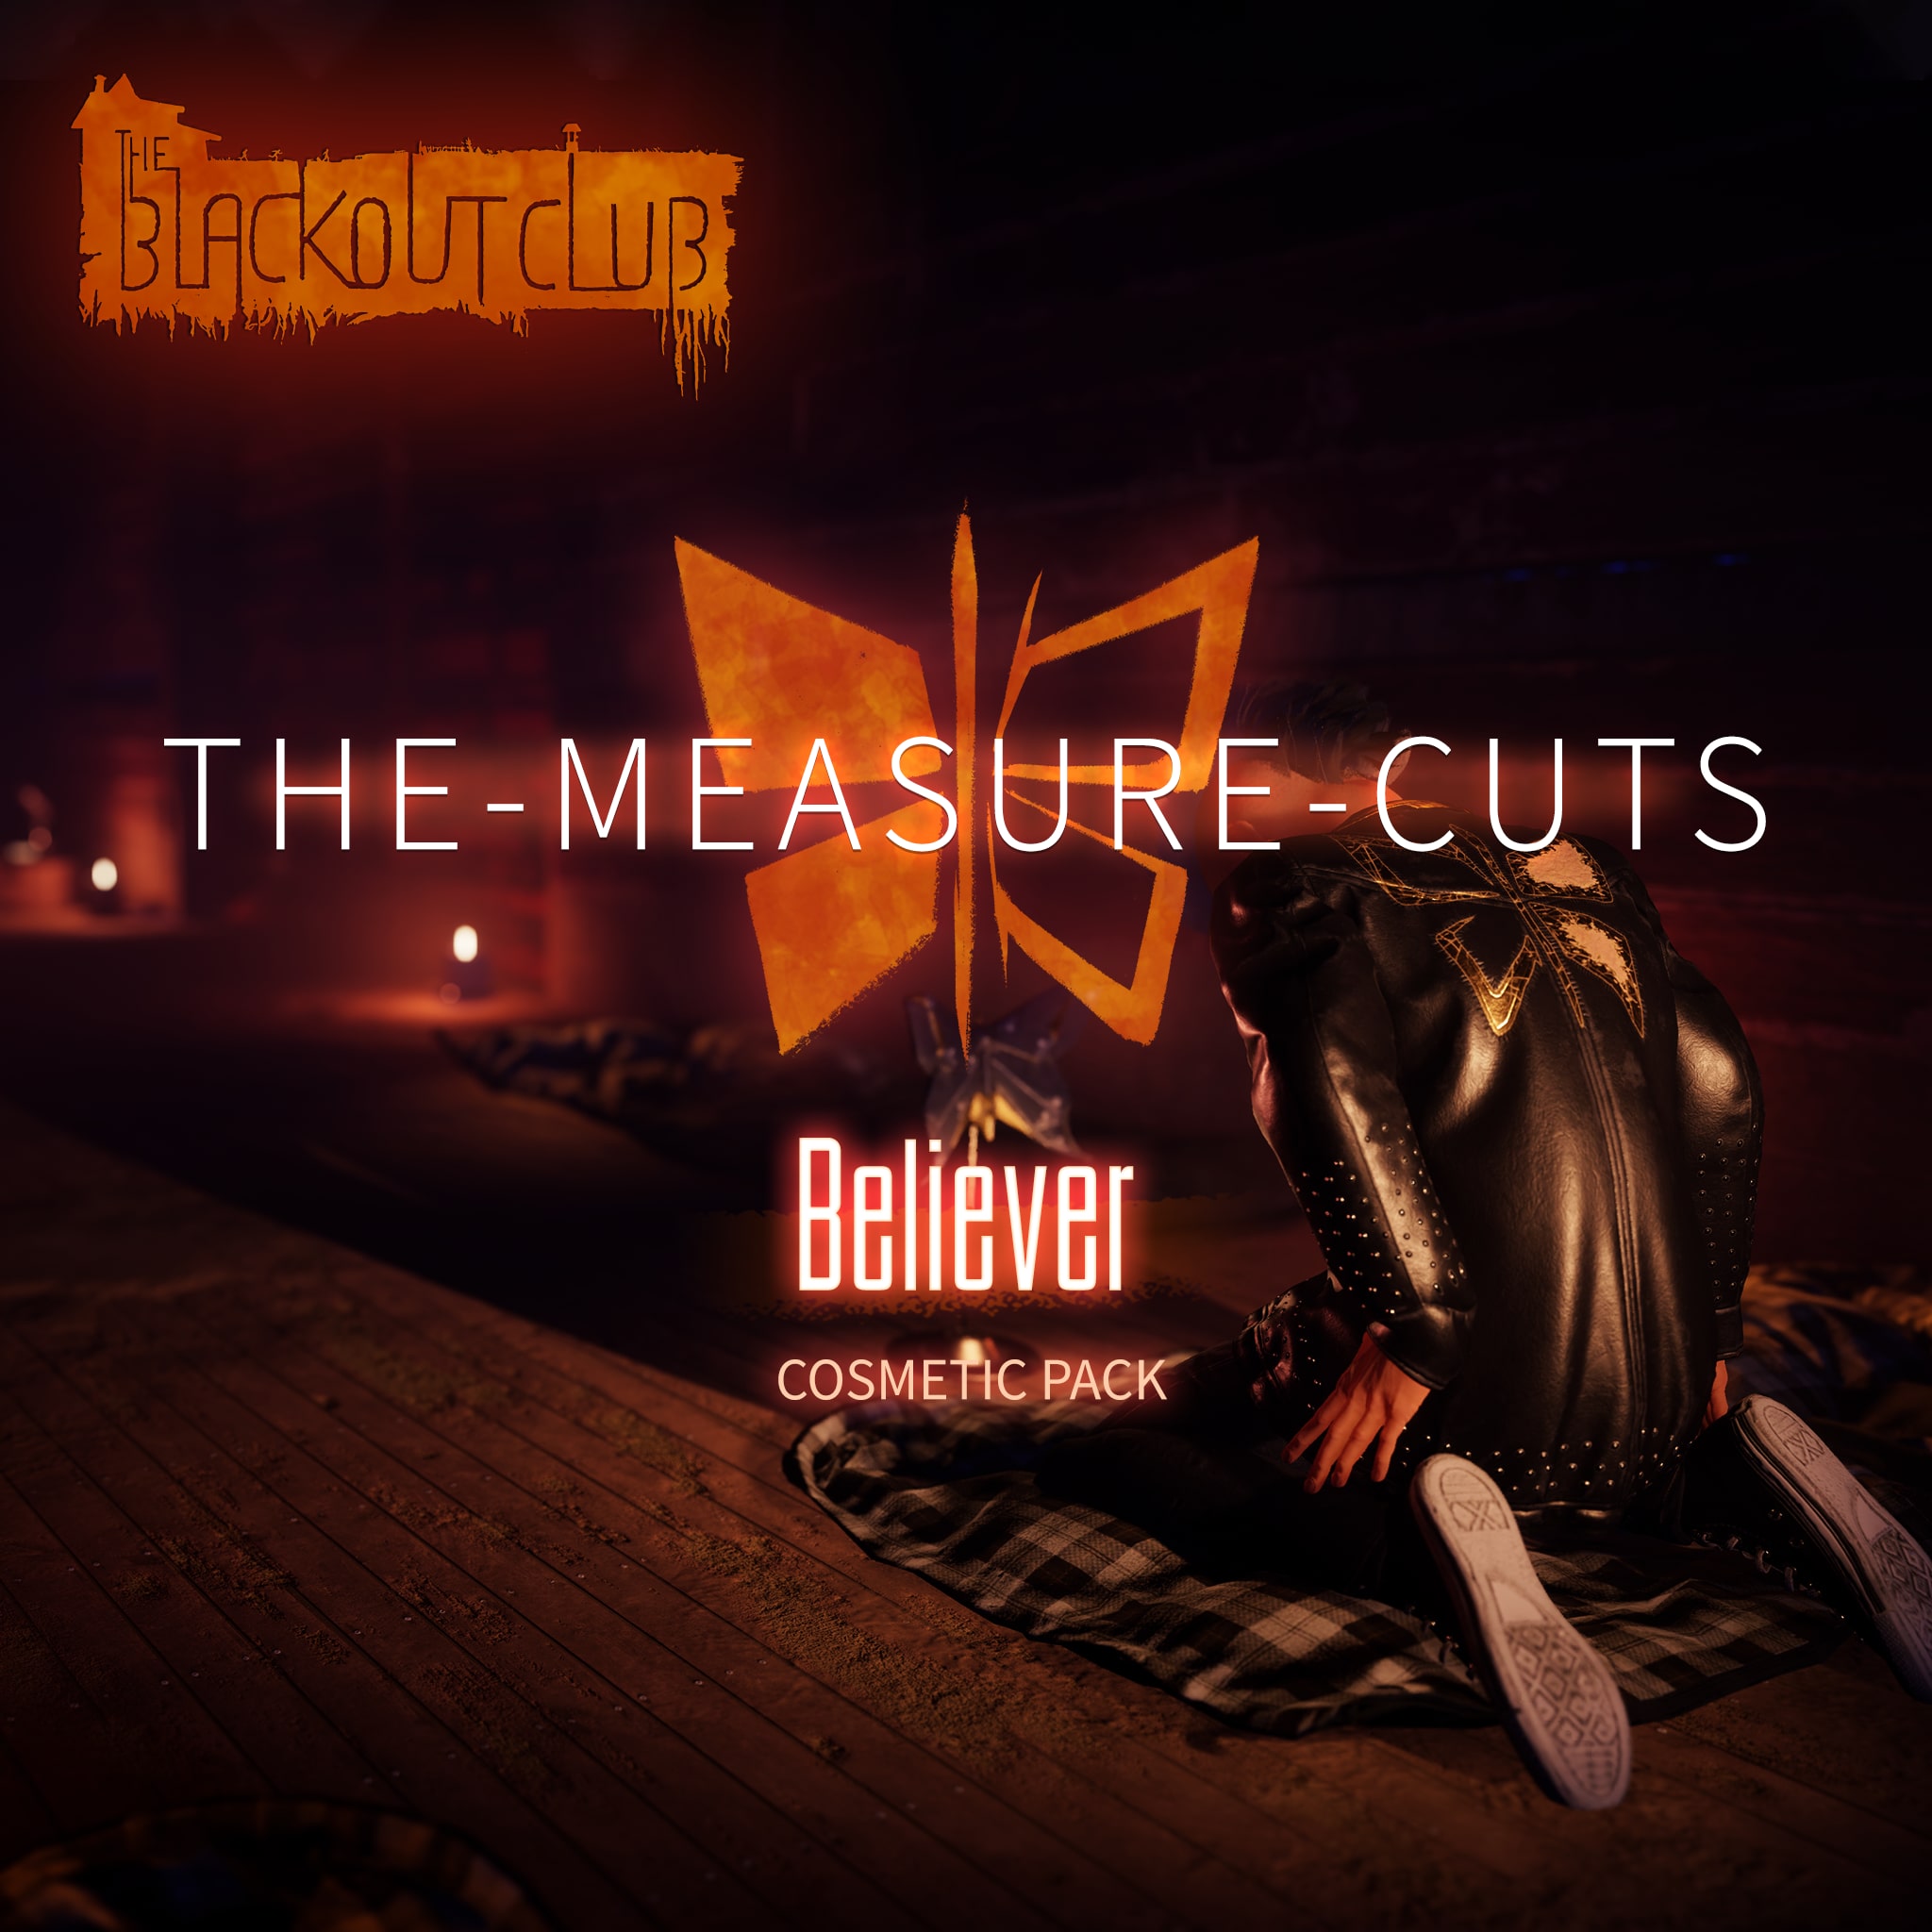 THE-MEASURE-CUTS Cosmetic Pack